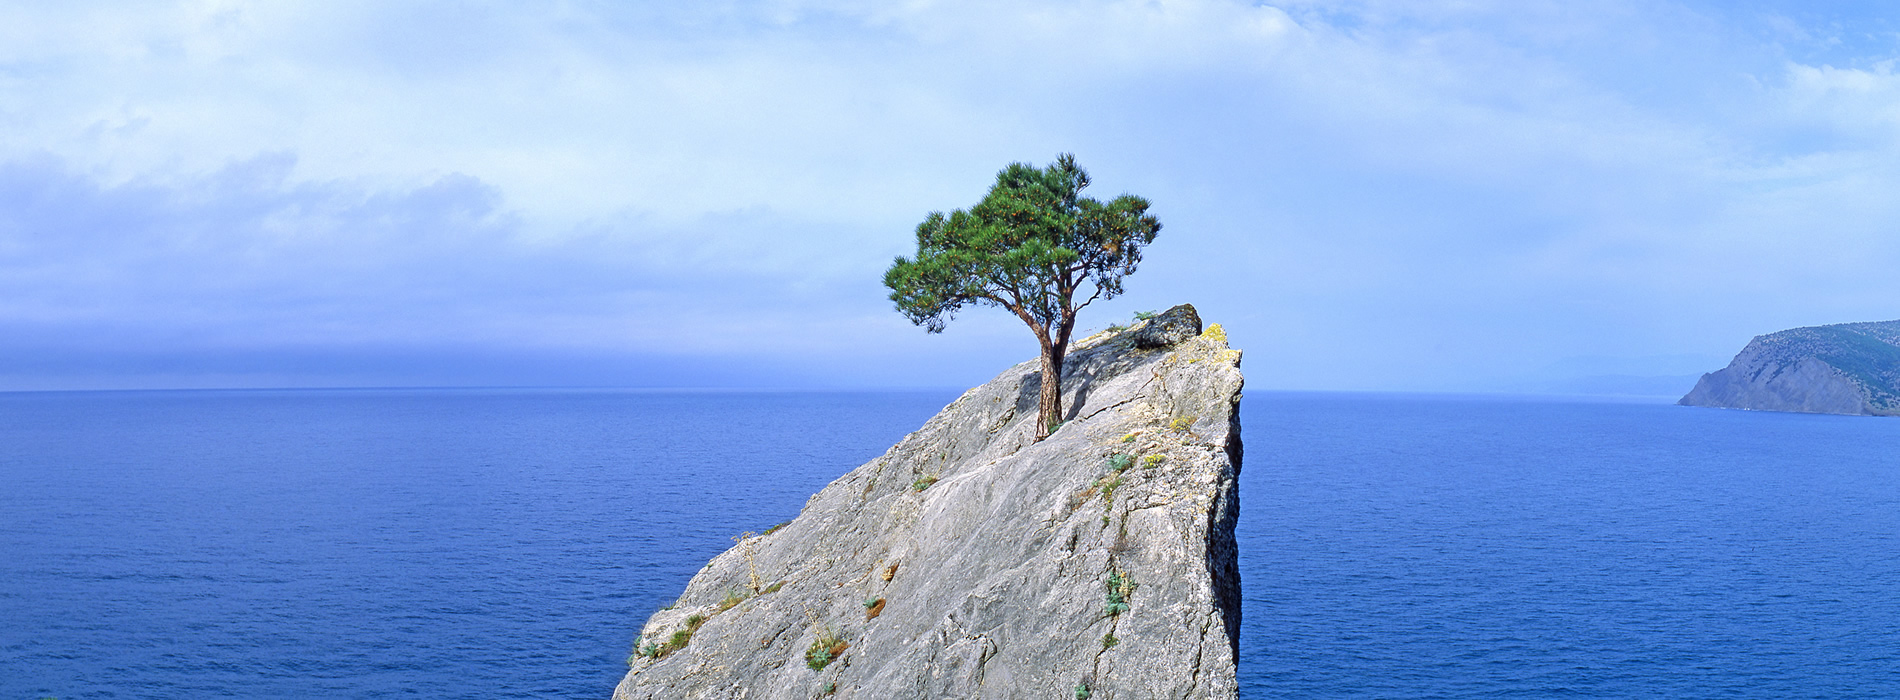 A single tree growing out of the top of a rock over looking the ocean.